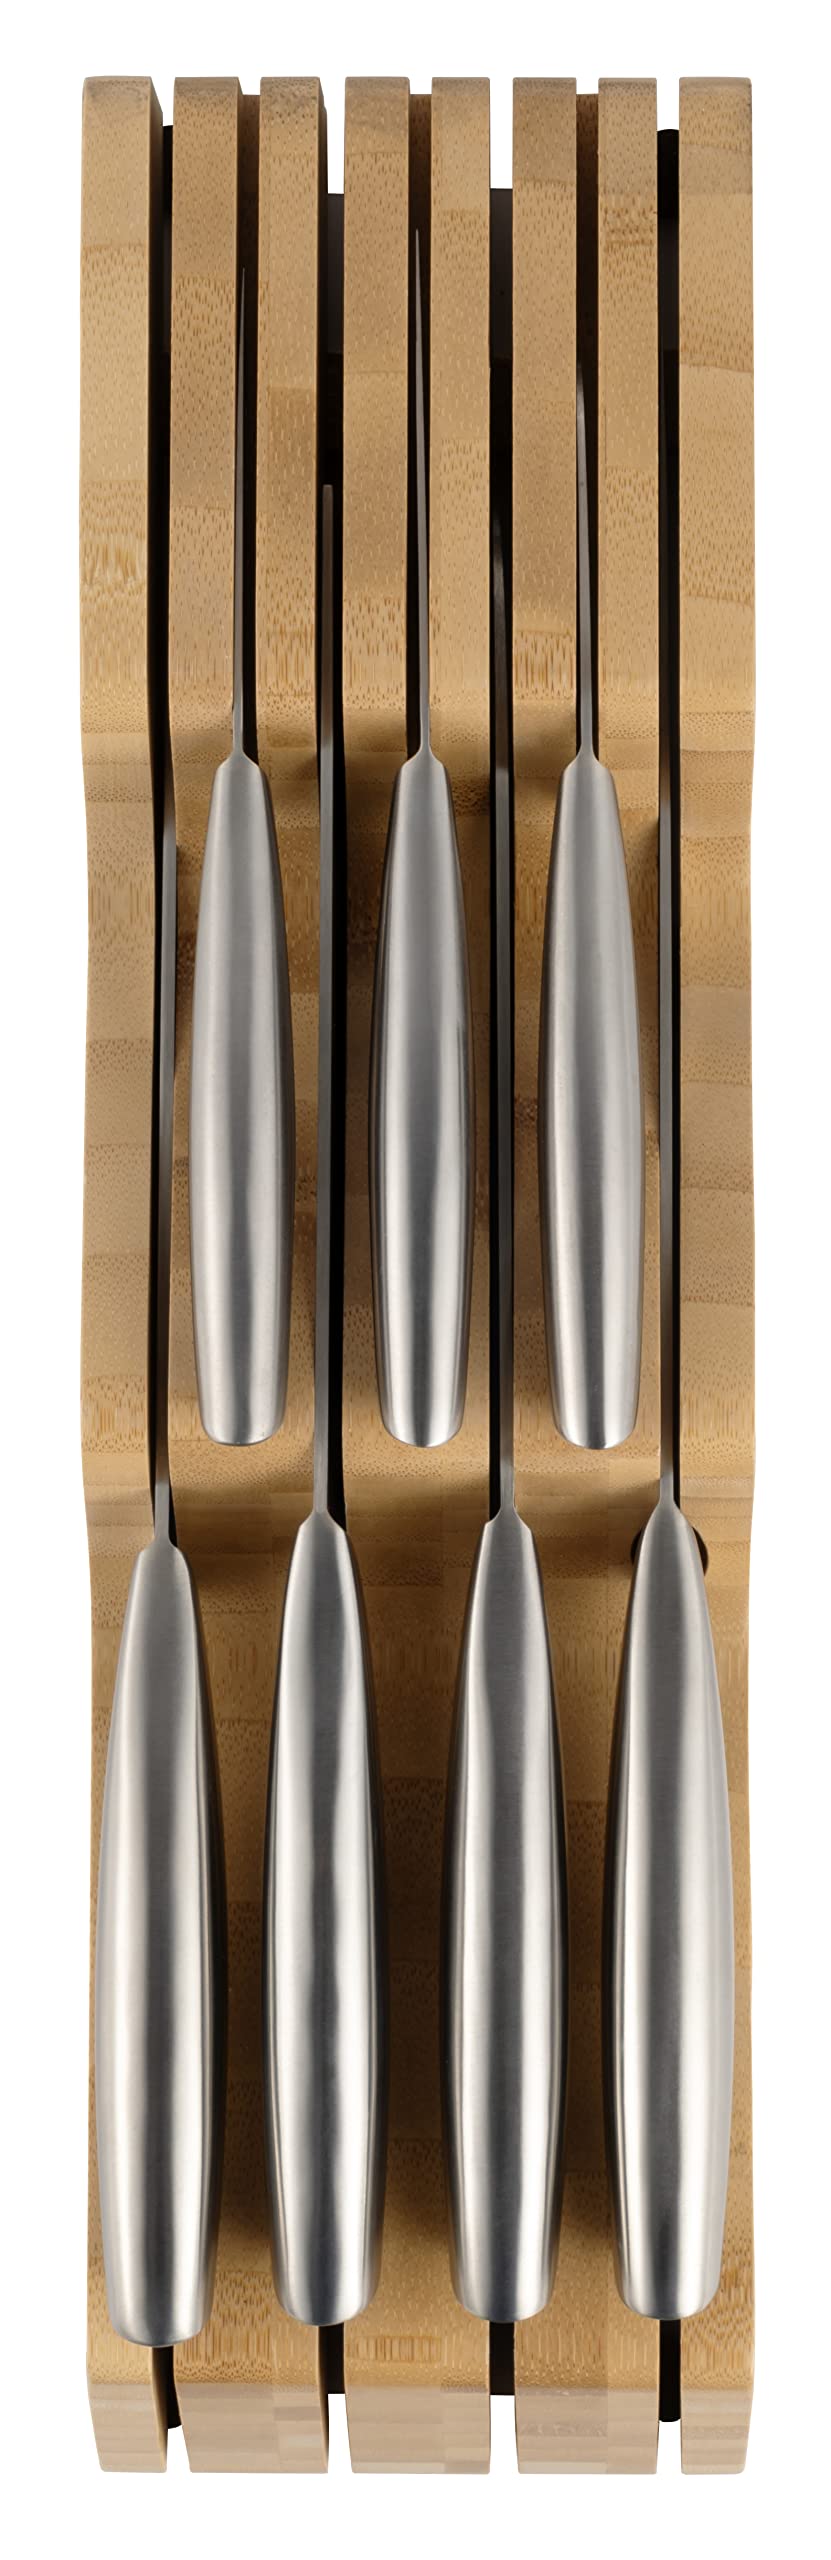 Ozeri 8-Piece Stainless Steel Knife Set, with Japanese Stainless Steel Slotted Blades